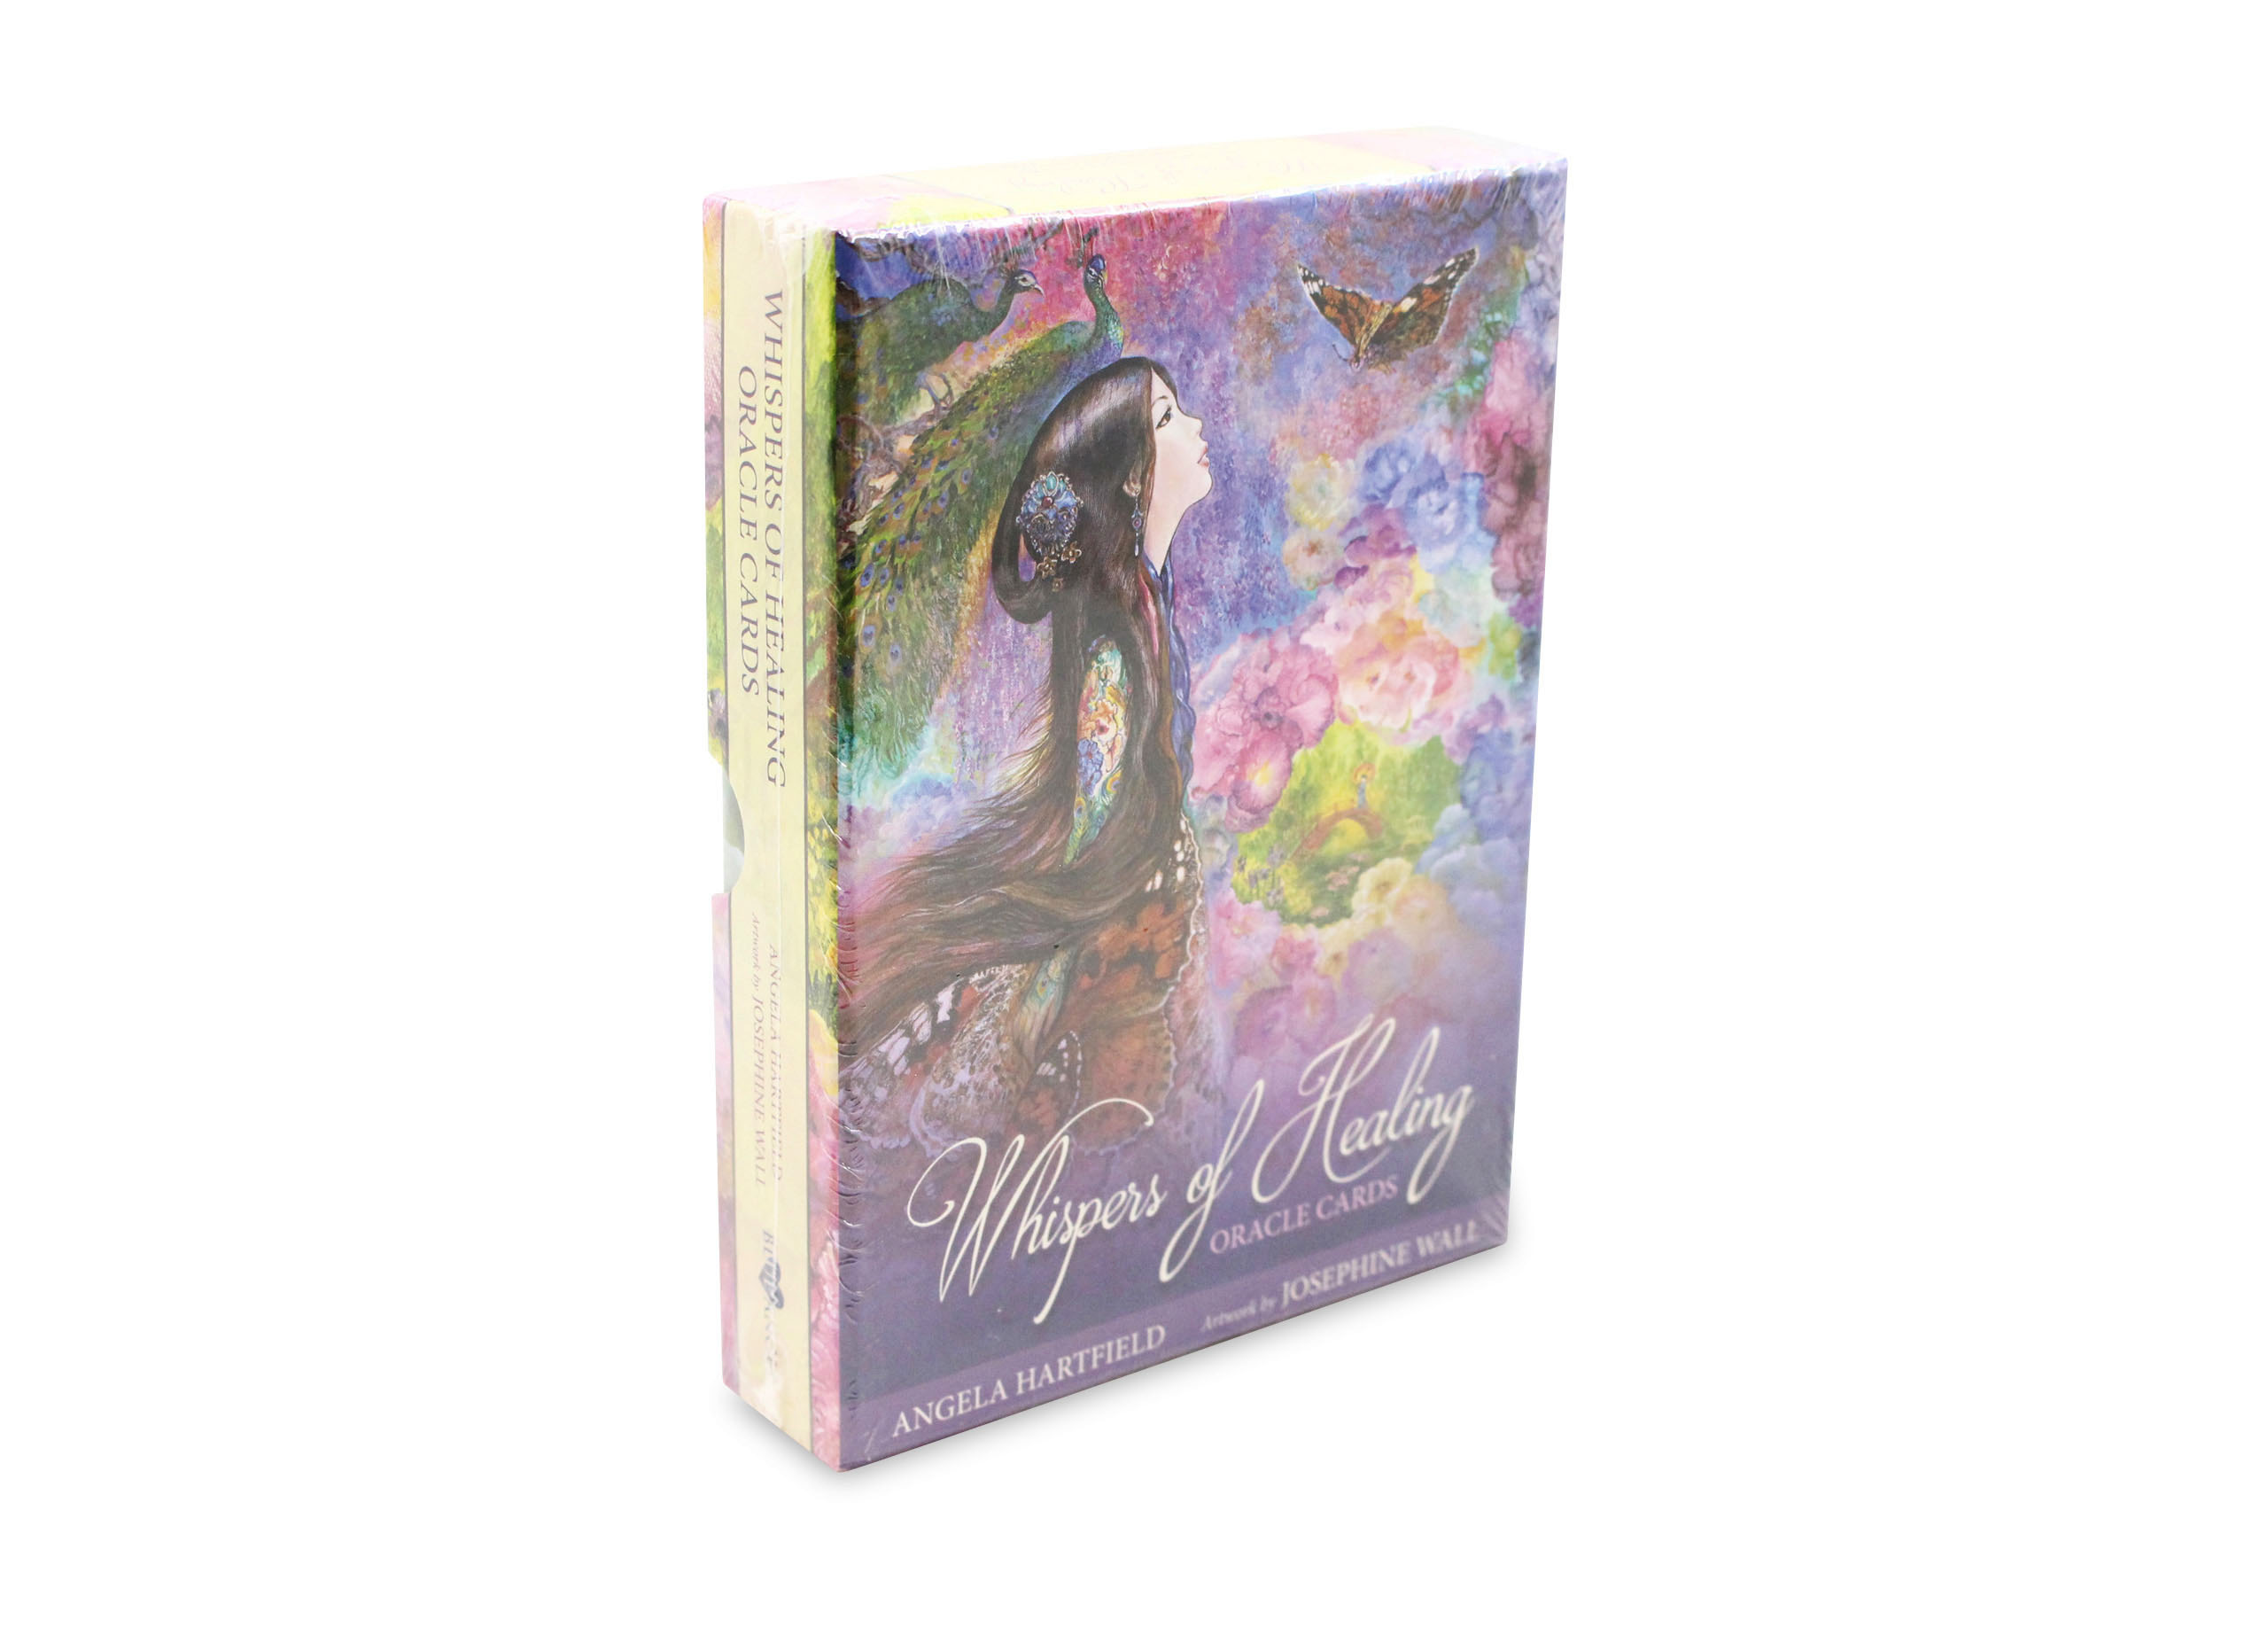 Whispers of Healing Oracle Cards-Crystal Dreams